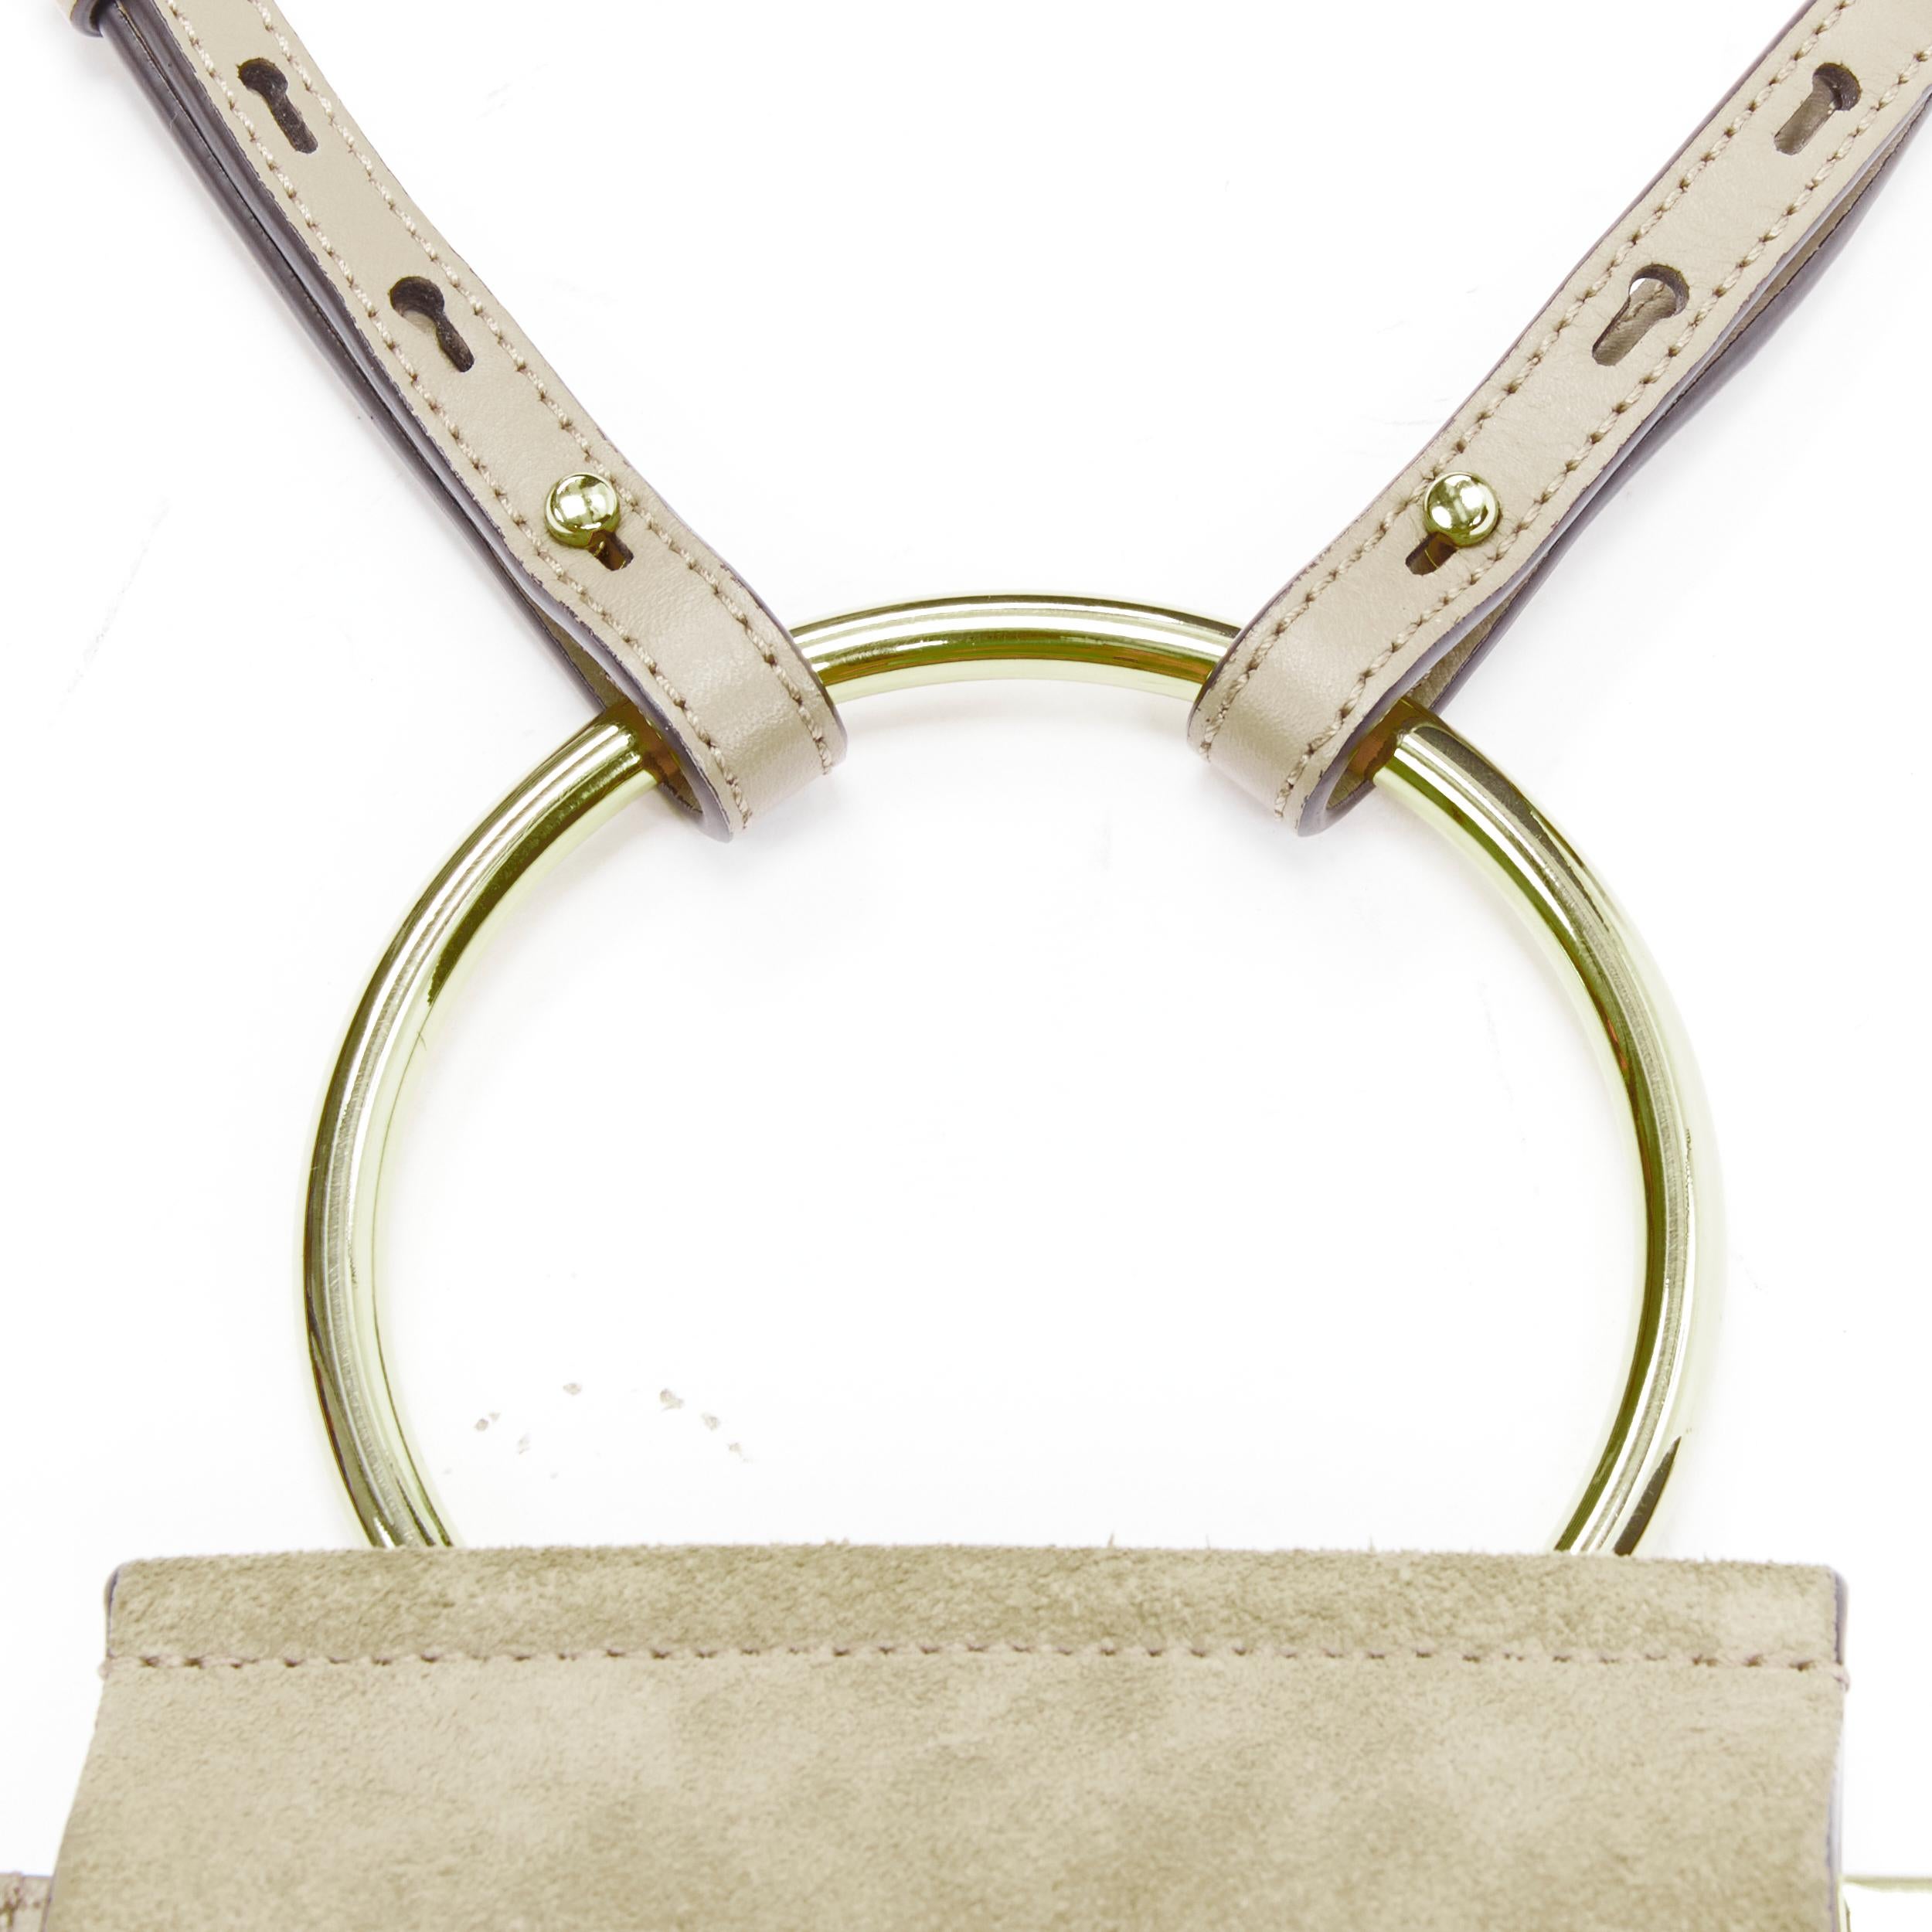 Women's CHLOE Faye gold bangle bracelet ring chained crossbody grey suede leather bag For Sale